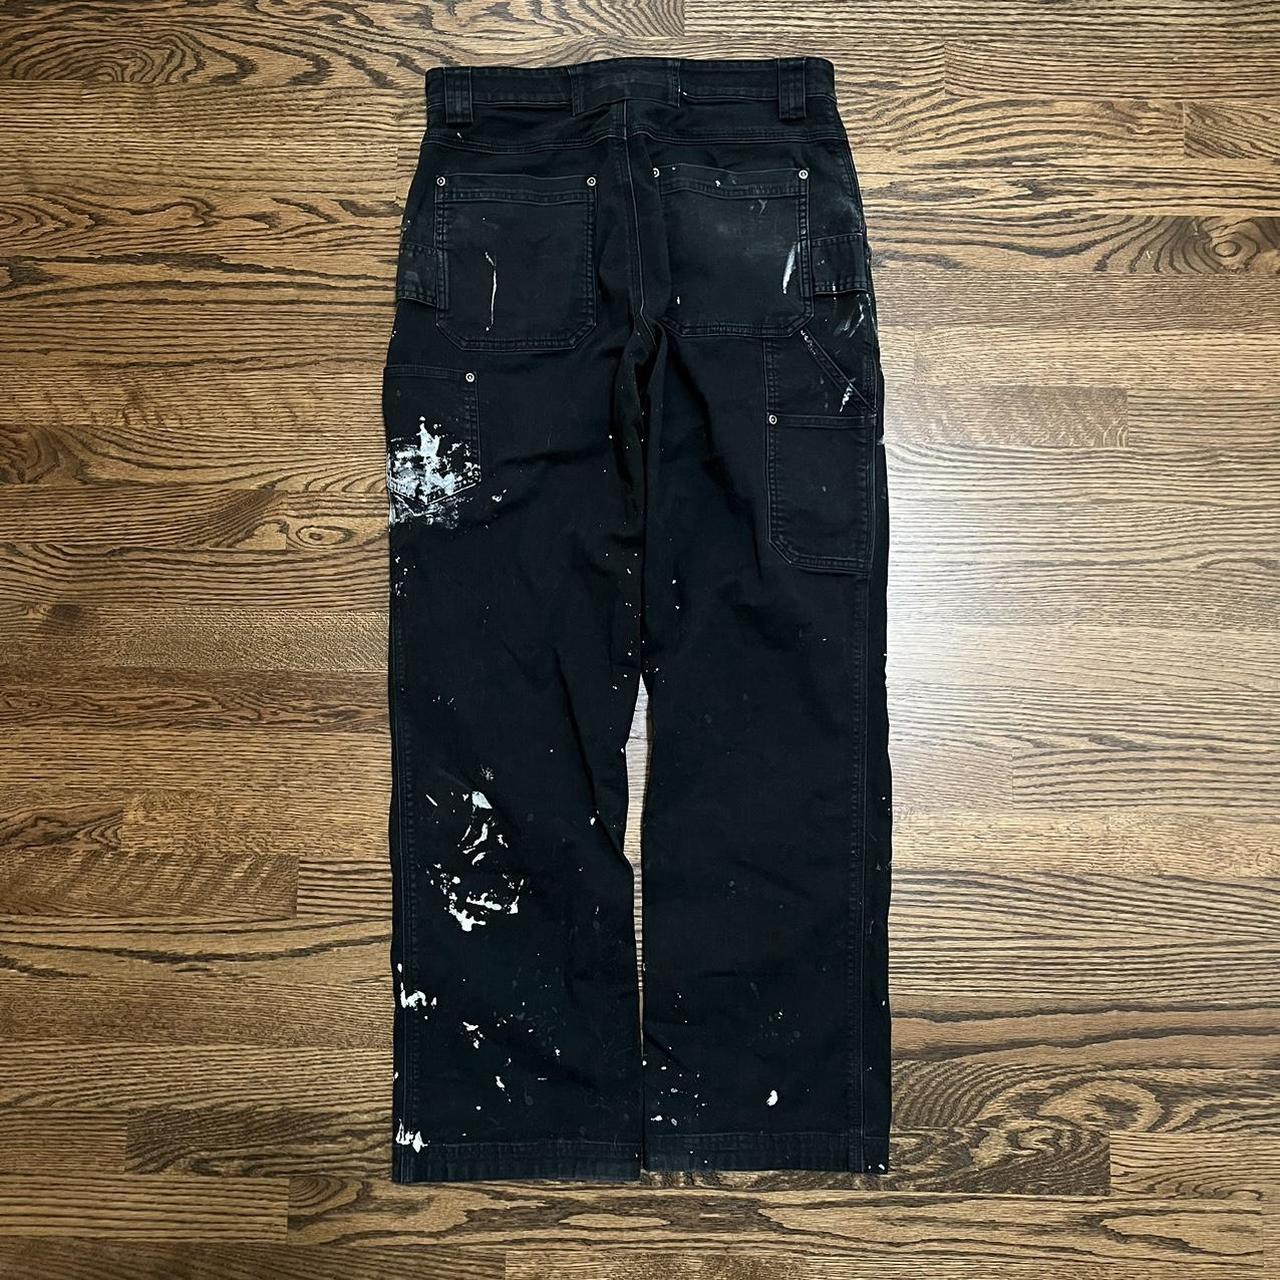 Duluth Trading Company Men's Black and White Jeans (2)